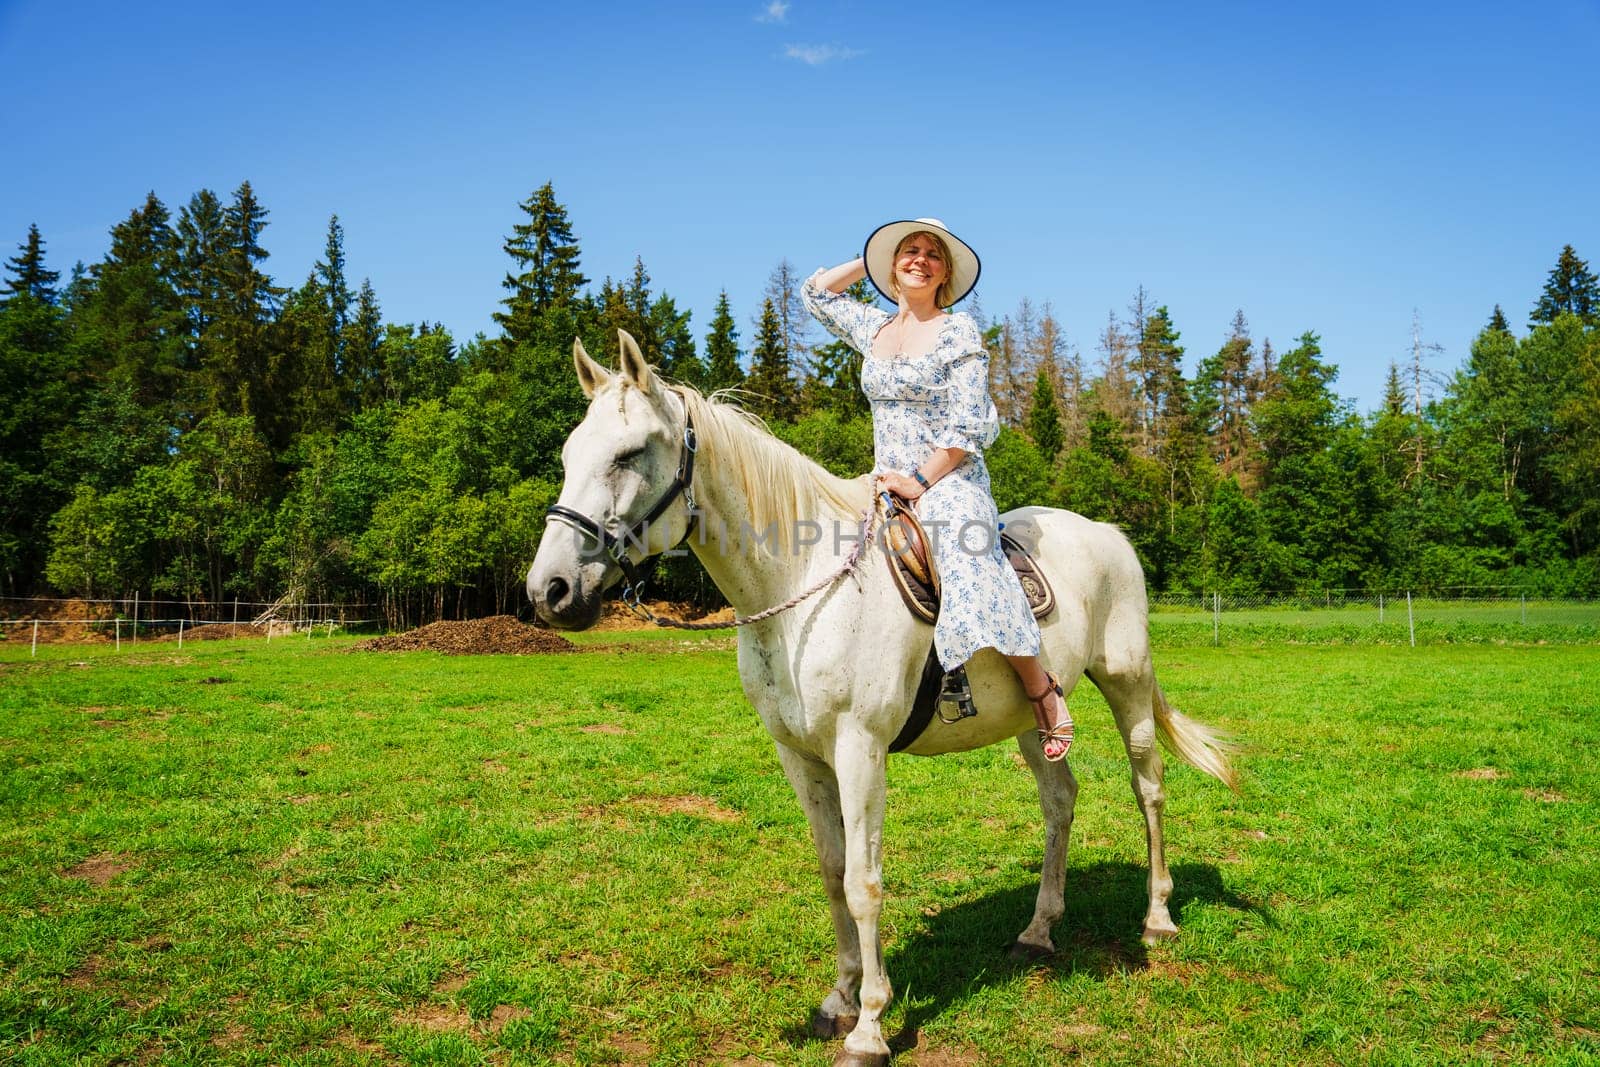 A beautiful young woman riding a majestic horse through a lush green field on a sunny summer day, with a bright blue sky and fluffy white clouds in the background.